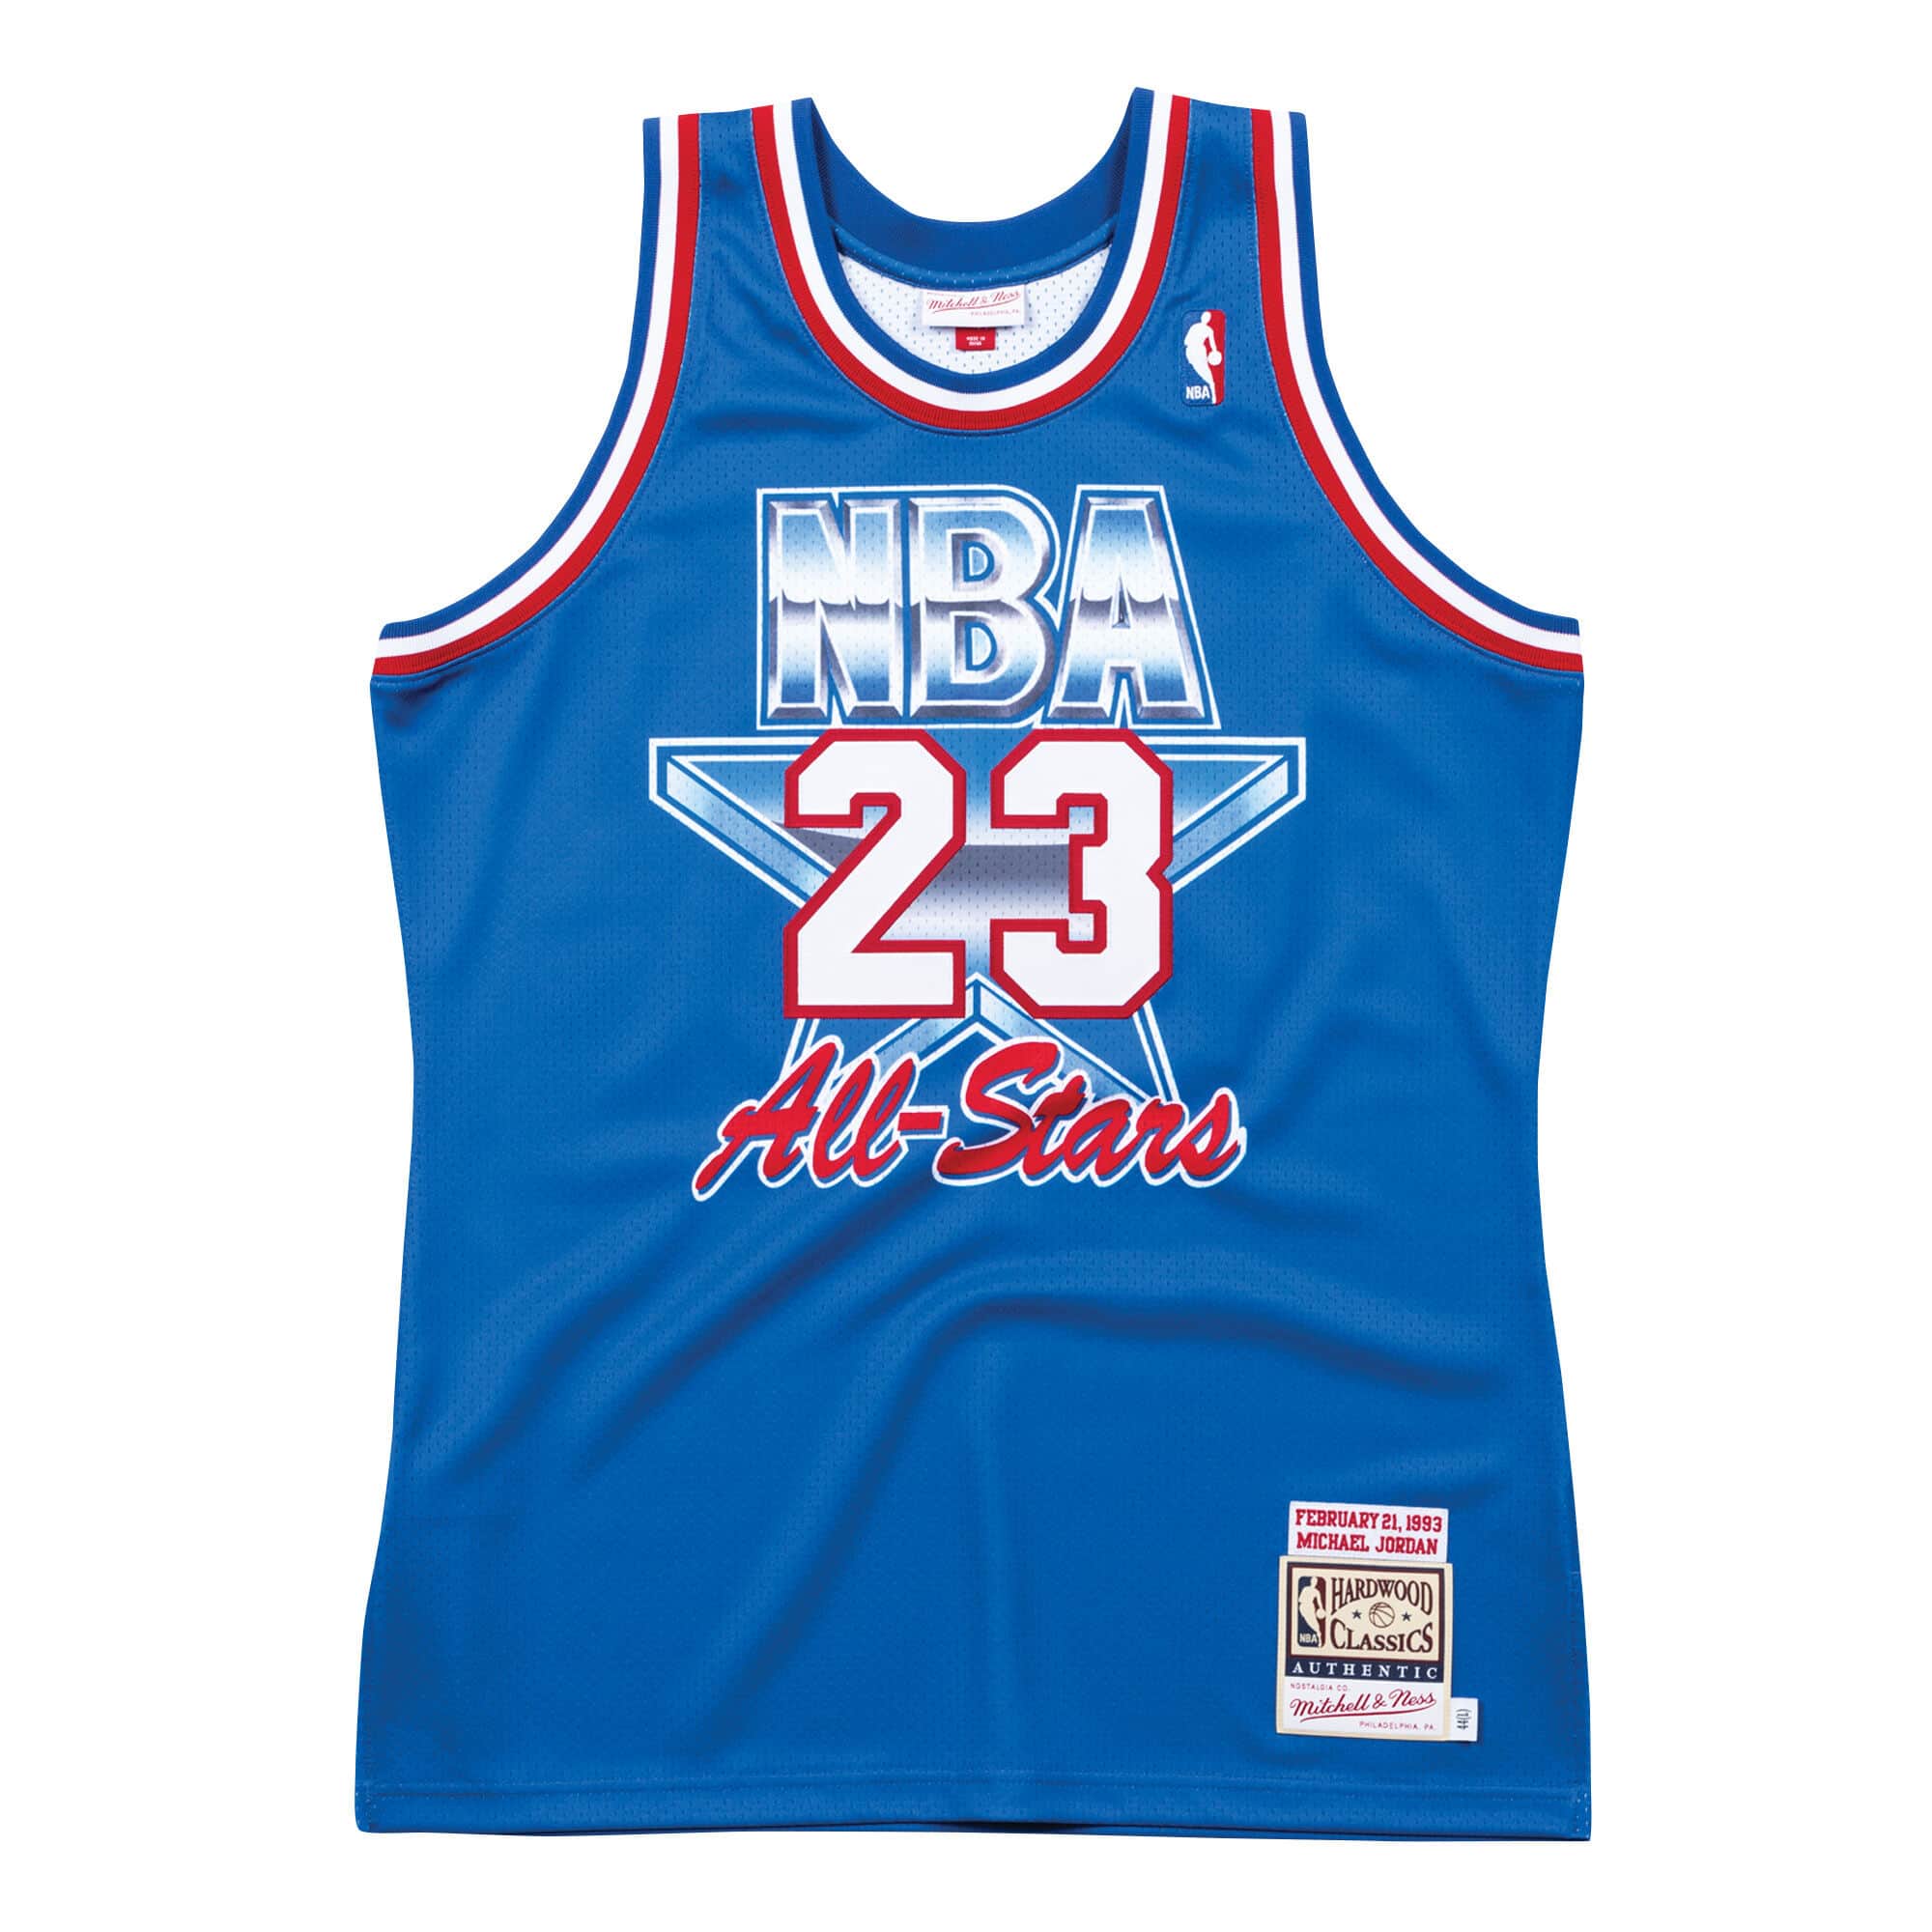 1993 nba all star game jersey